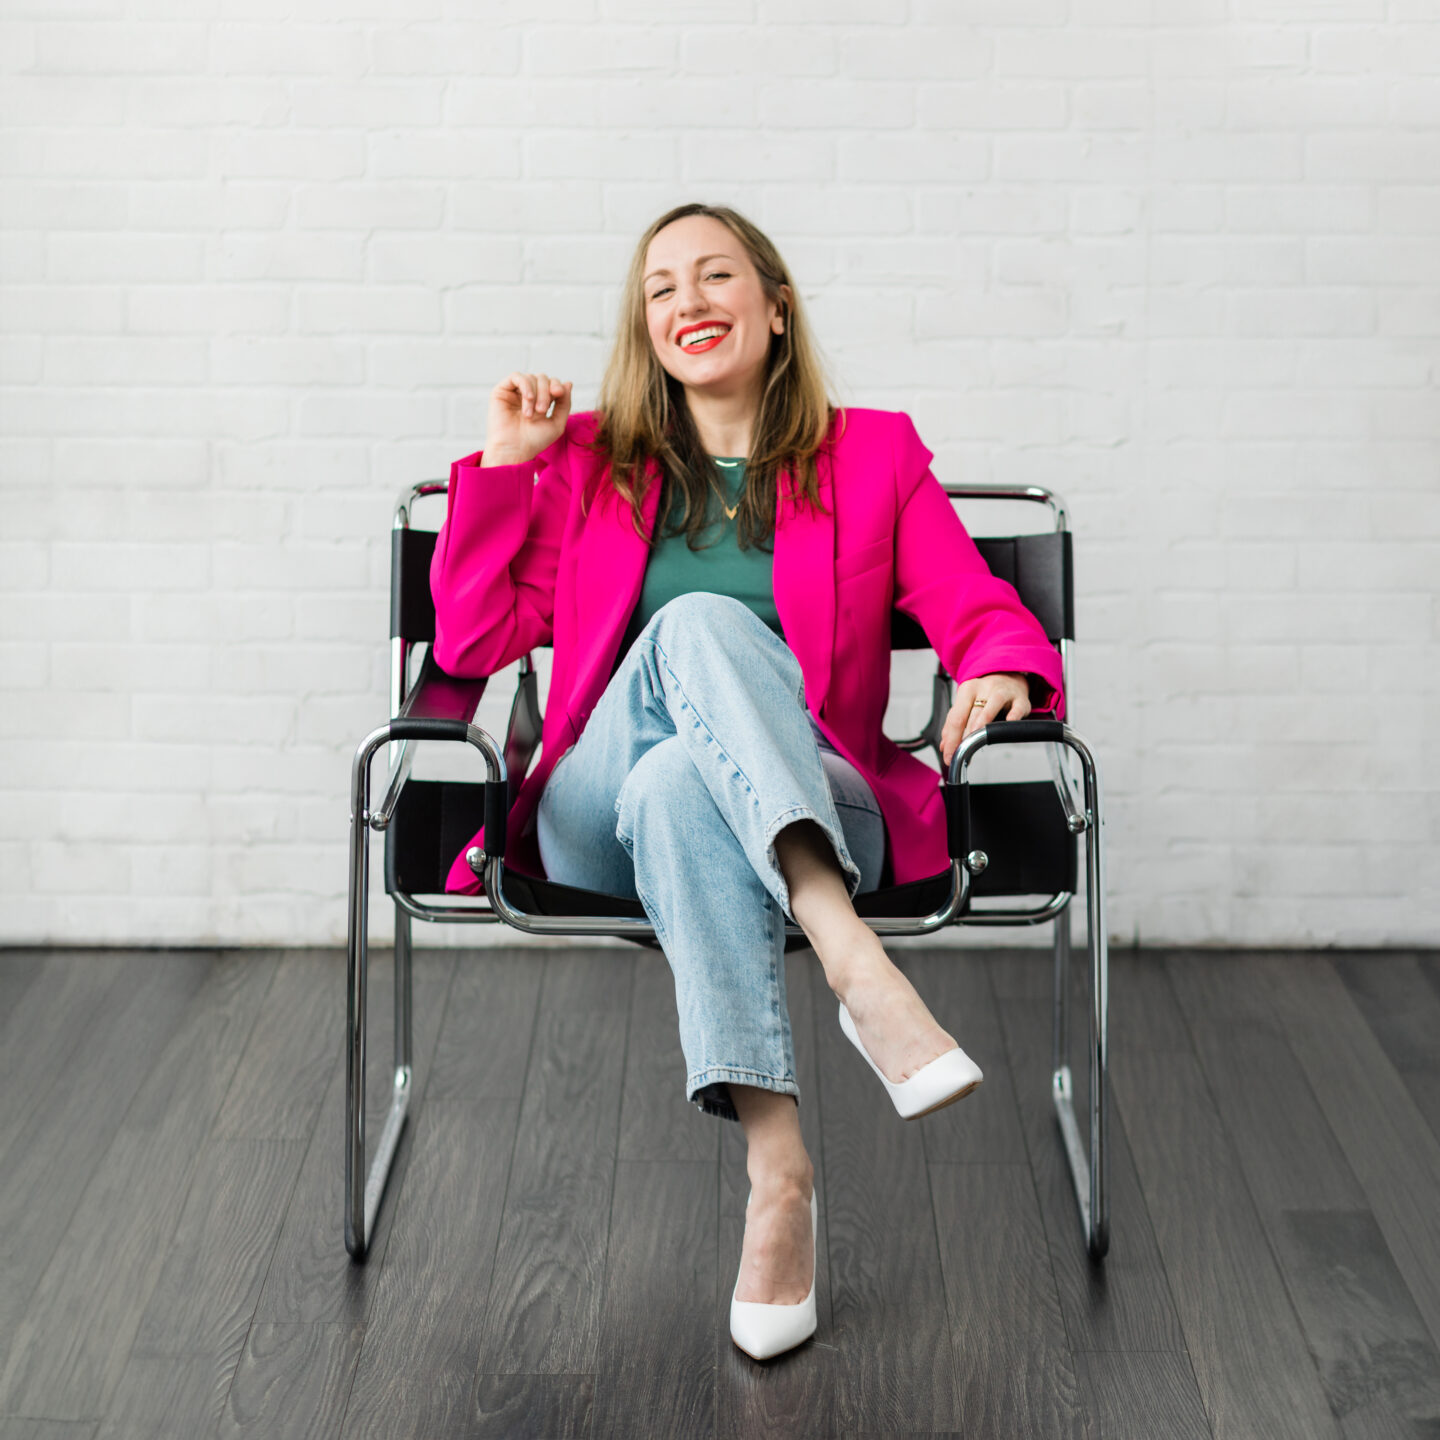 Woman sitting in a chair wearing a hot pink blazer green t shirt jeans and white heels.